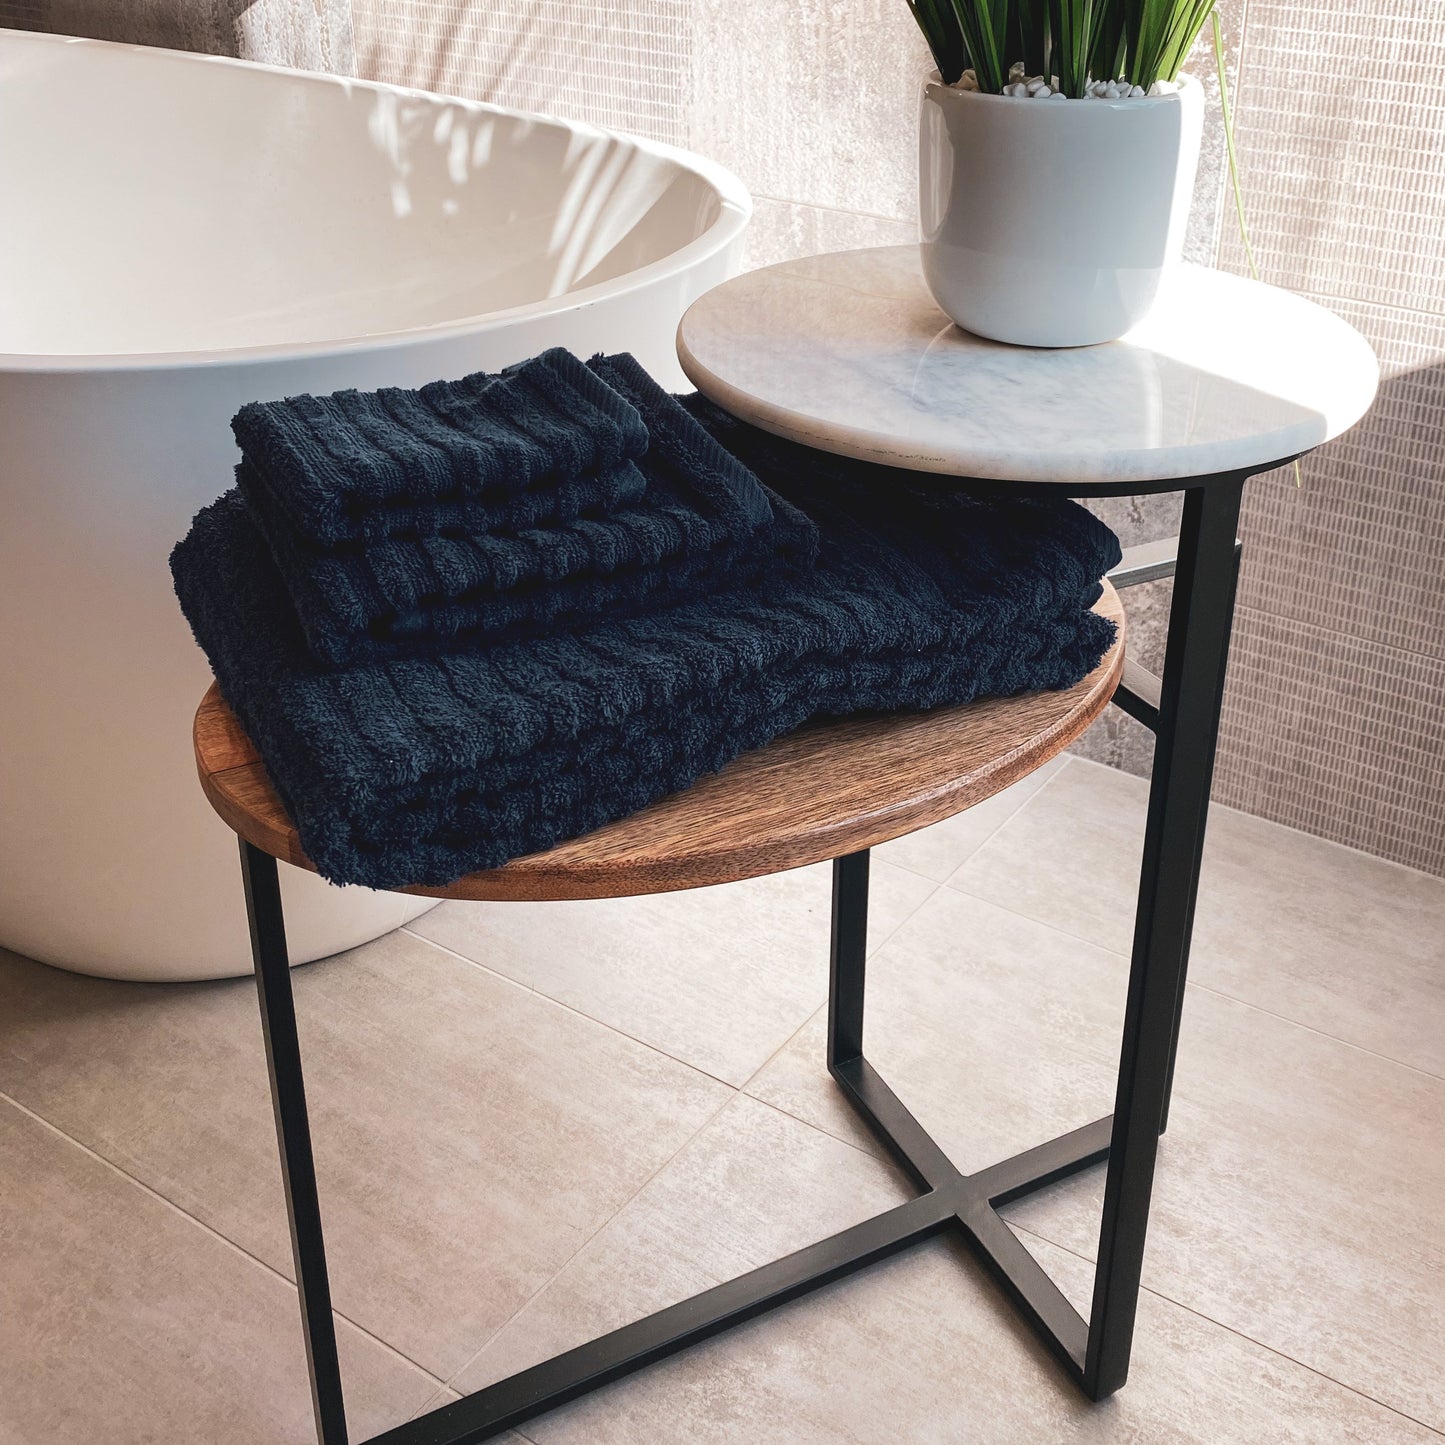 Towels by GUS Blue Ridge Collection - Luxury American Made Ribbed Cotton Towels